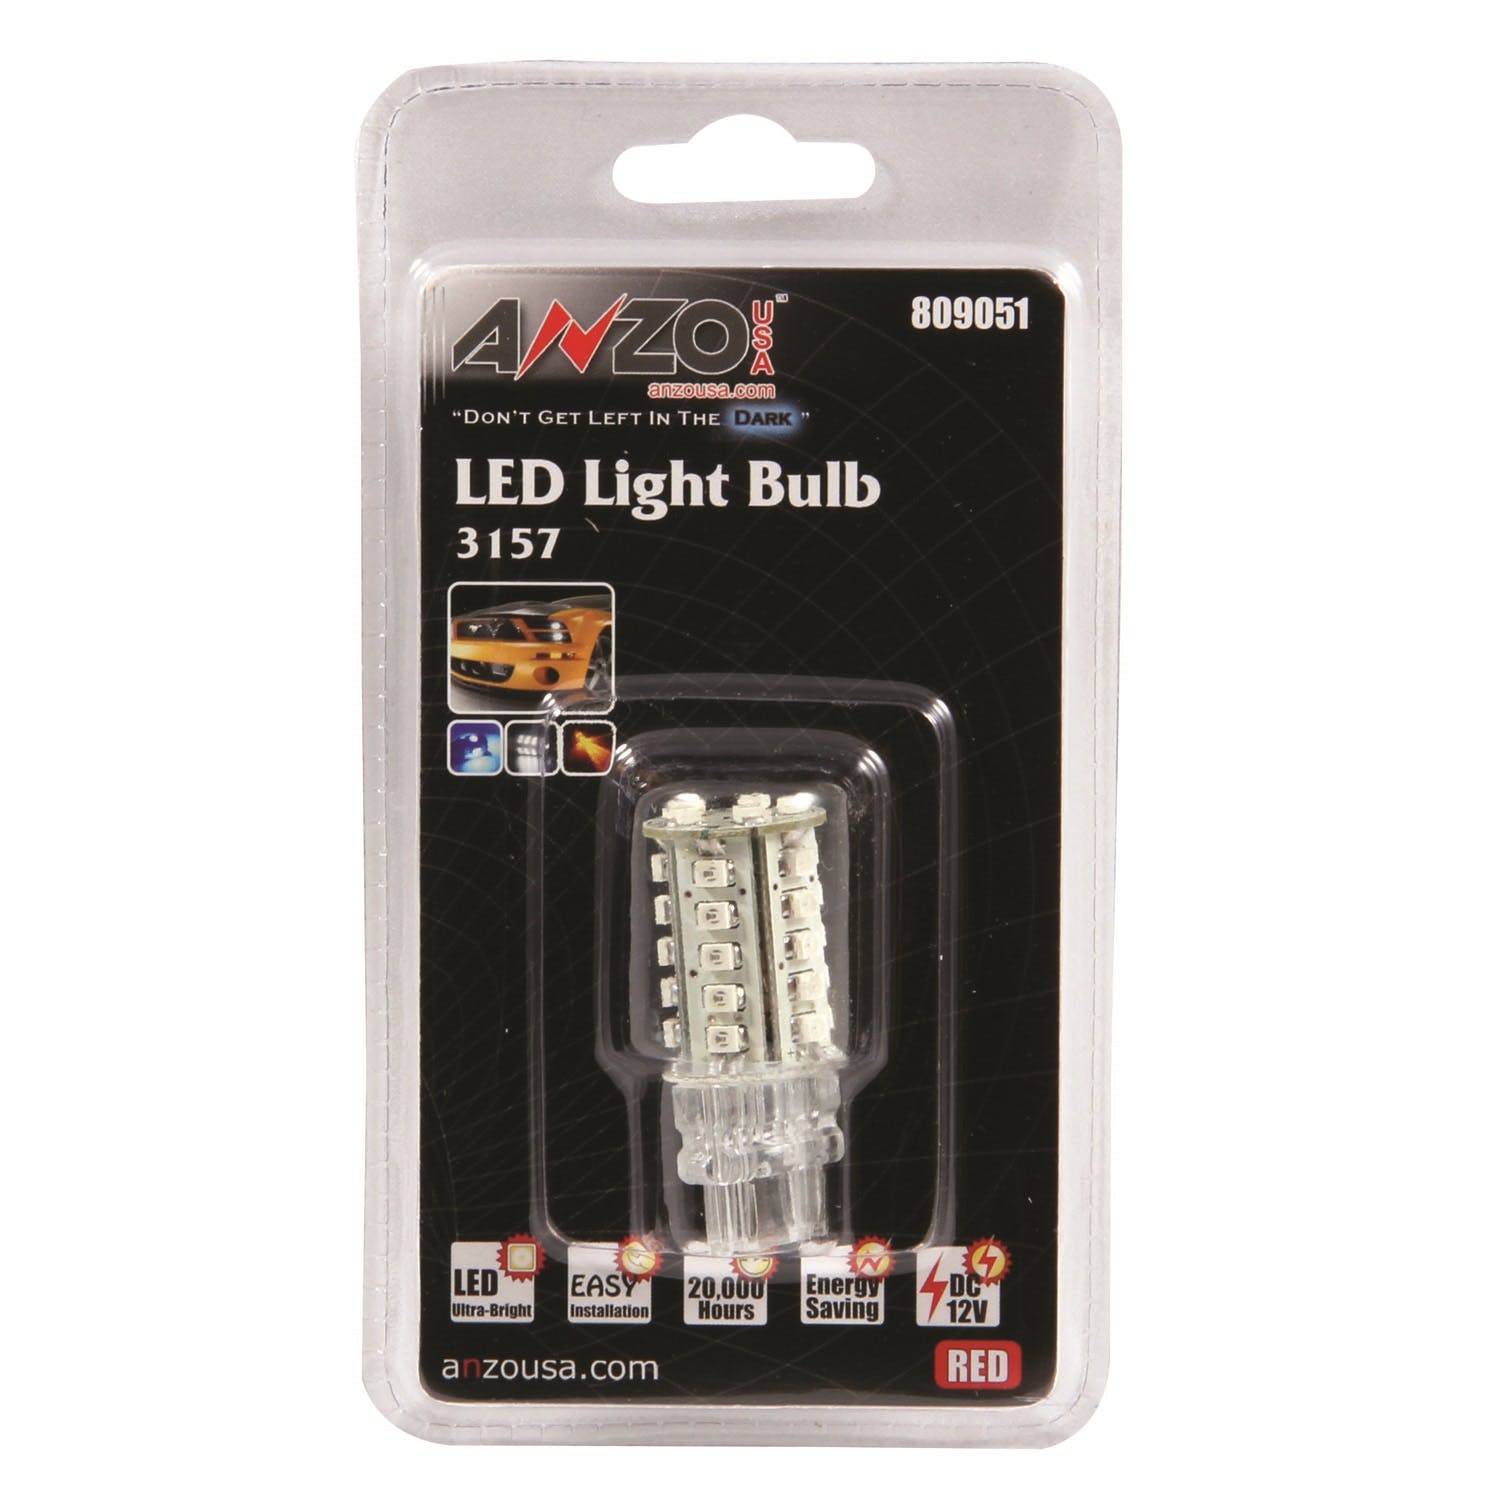 AnzoUSA 809051 3157 Red - 30 LED's 2" Tall